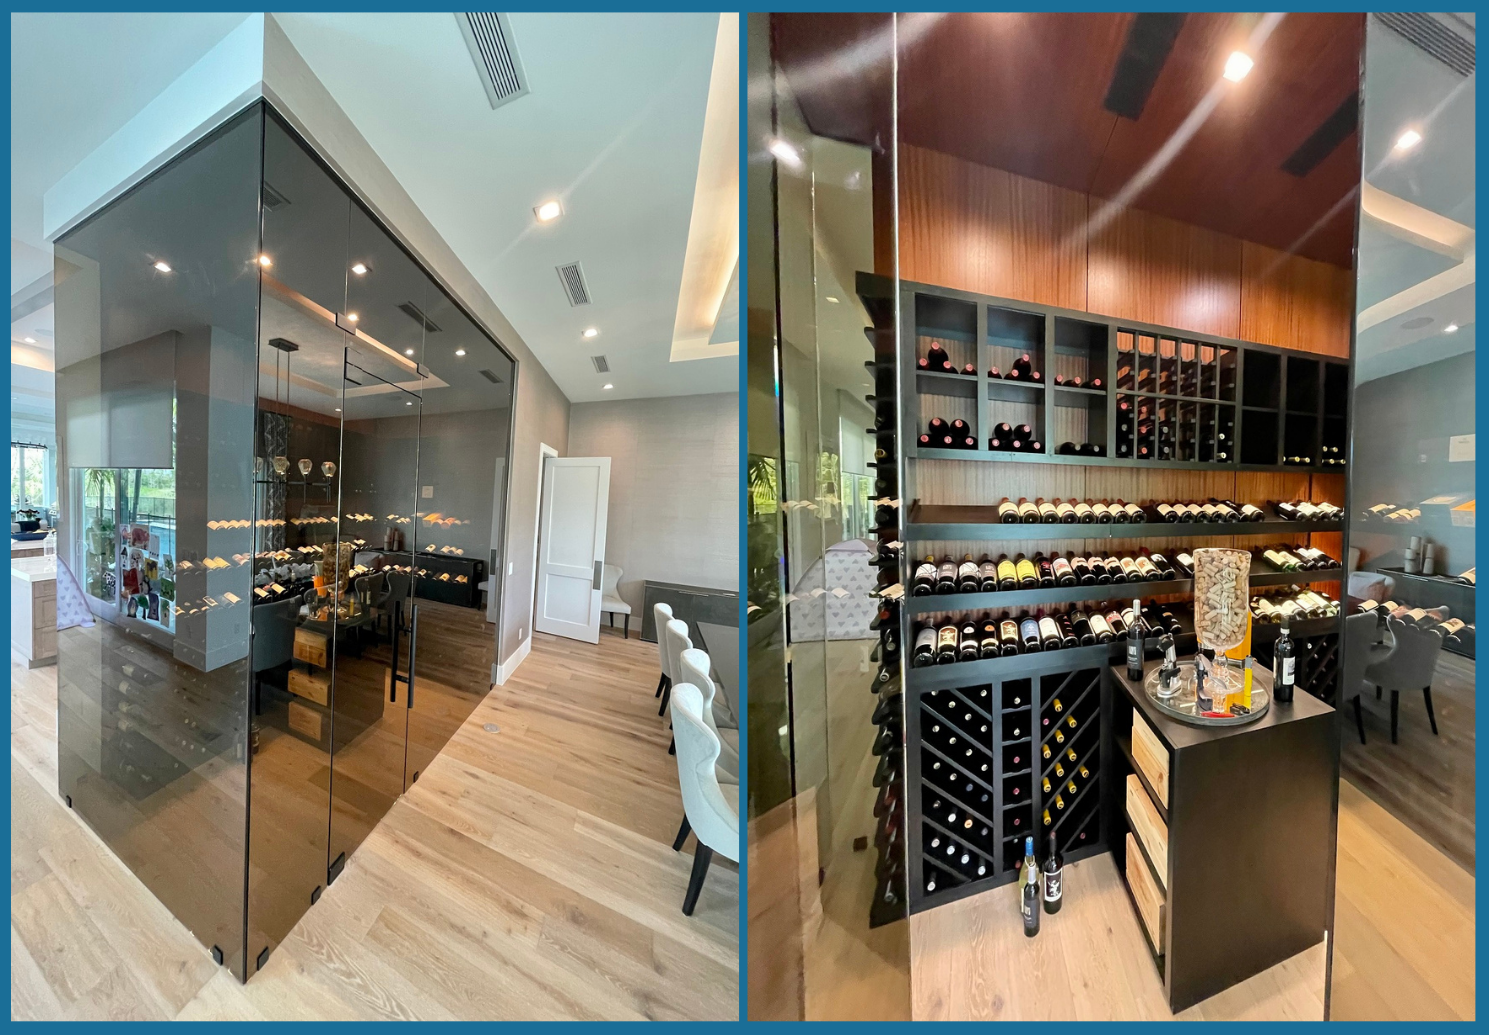 Modern Wine Rooms Like This One with Glass-Enclosed Doors are Becoming a Popular Demand for San Diego Homeowners Nowadays